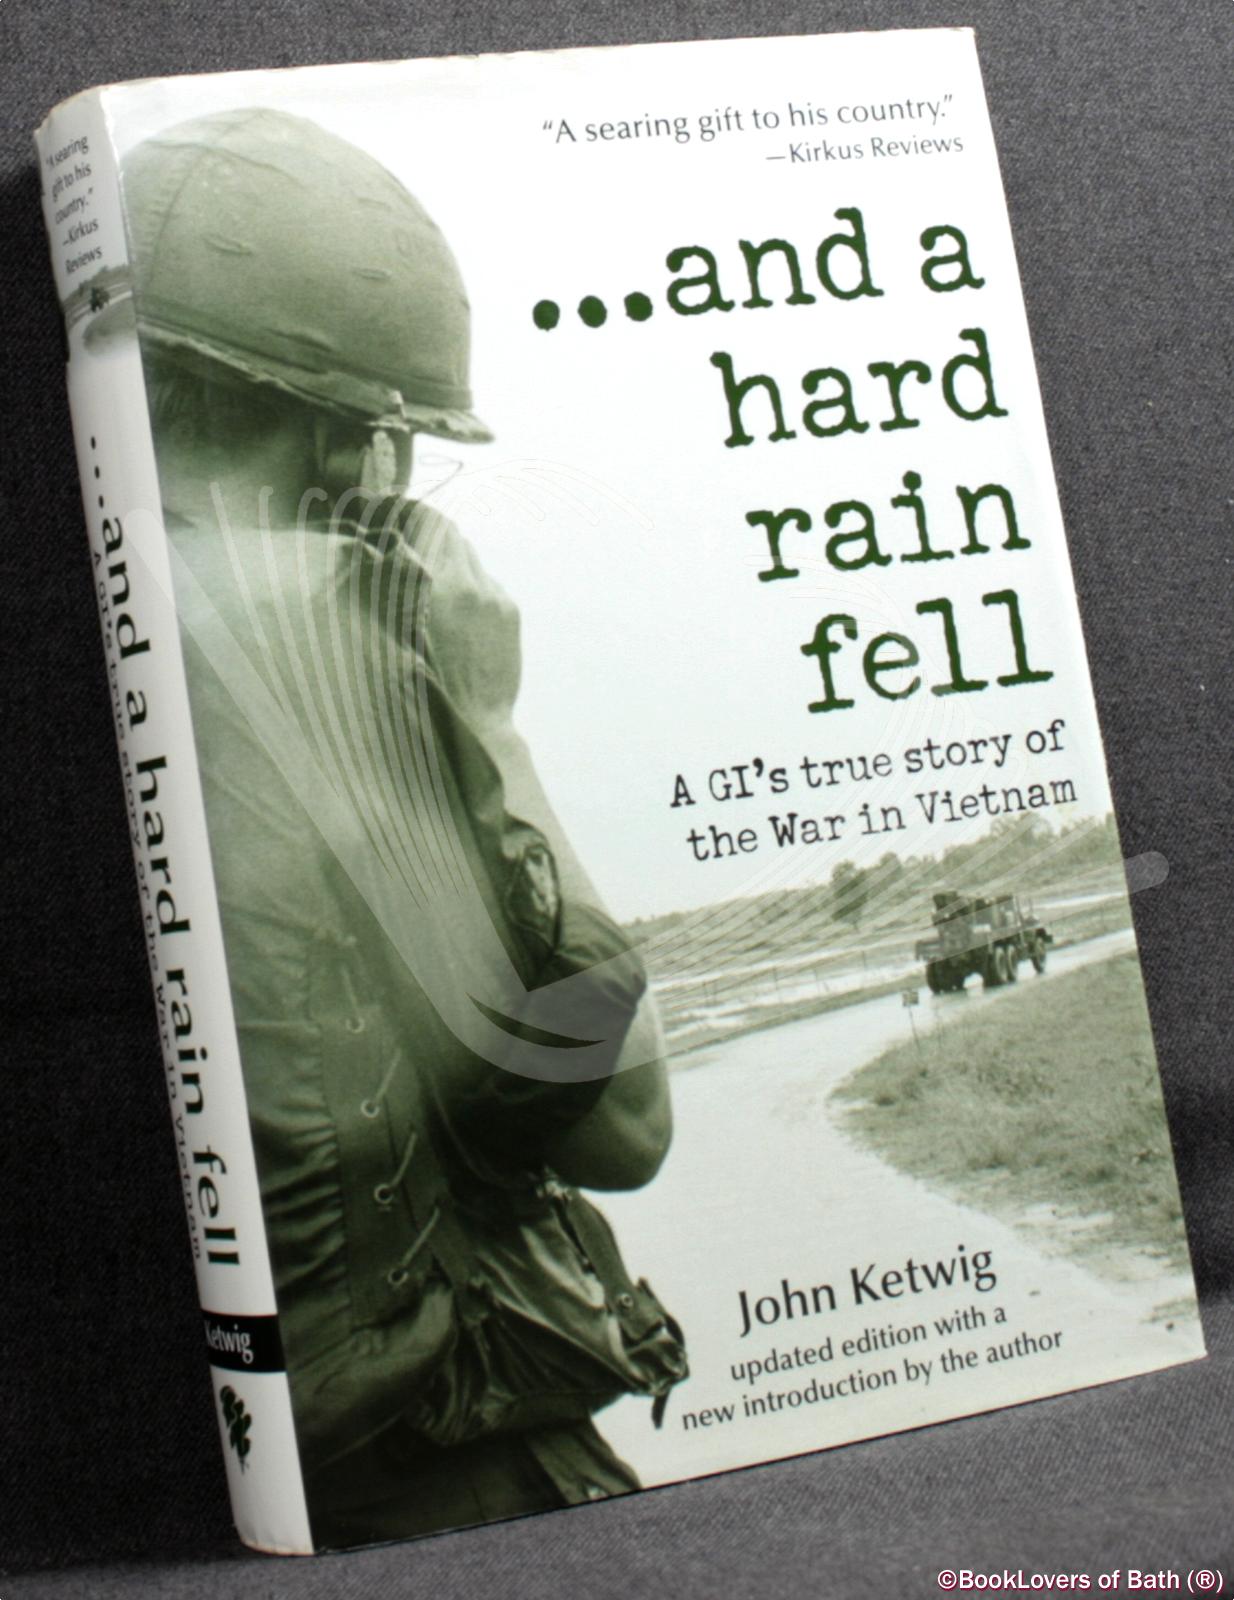 And a Hard Rain Fell: a GI"s True Story of the War in Vietnam